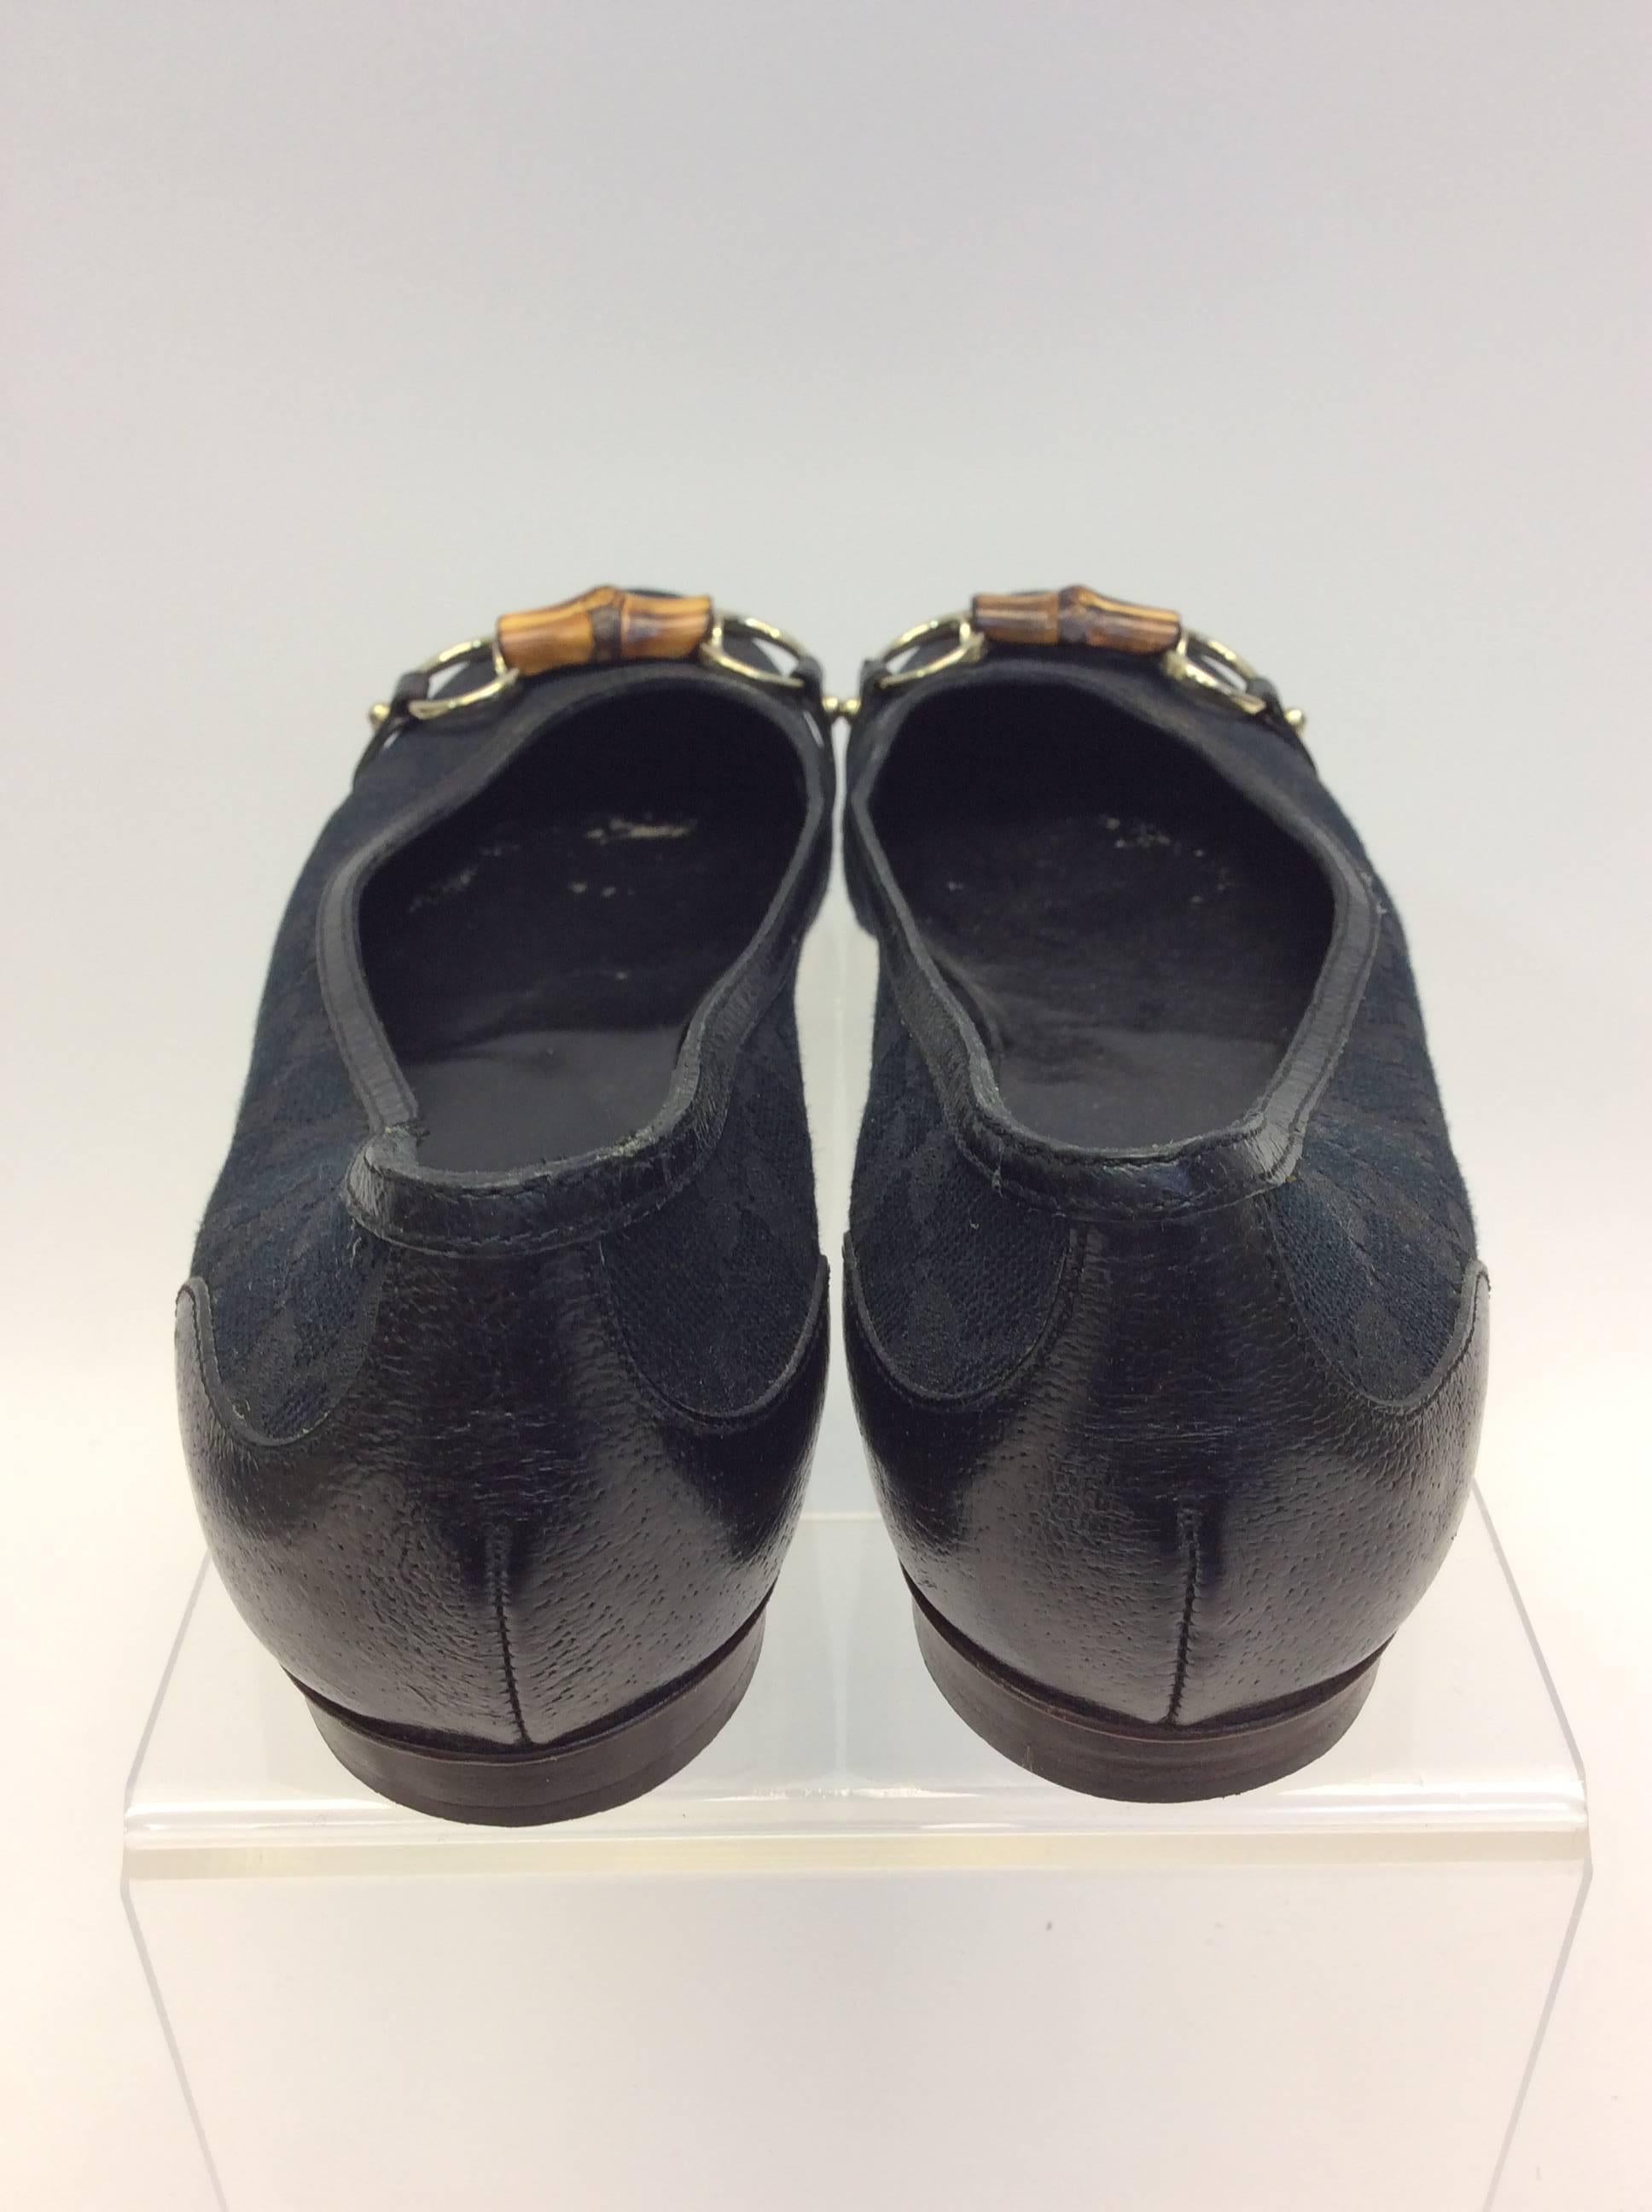 Gucci Black Flats In Good Condition For Sale In Narberth, PA